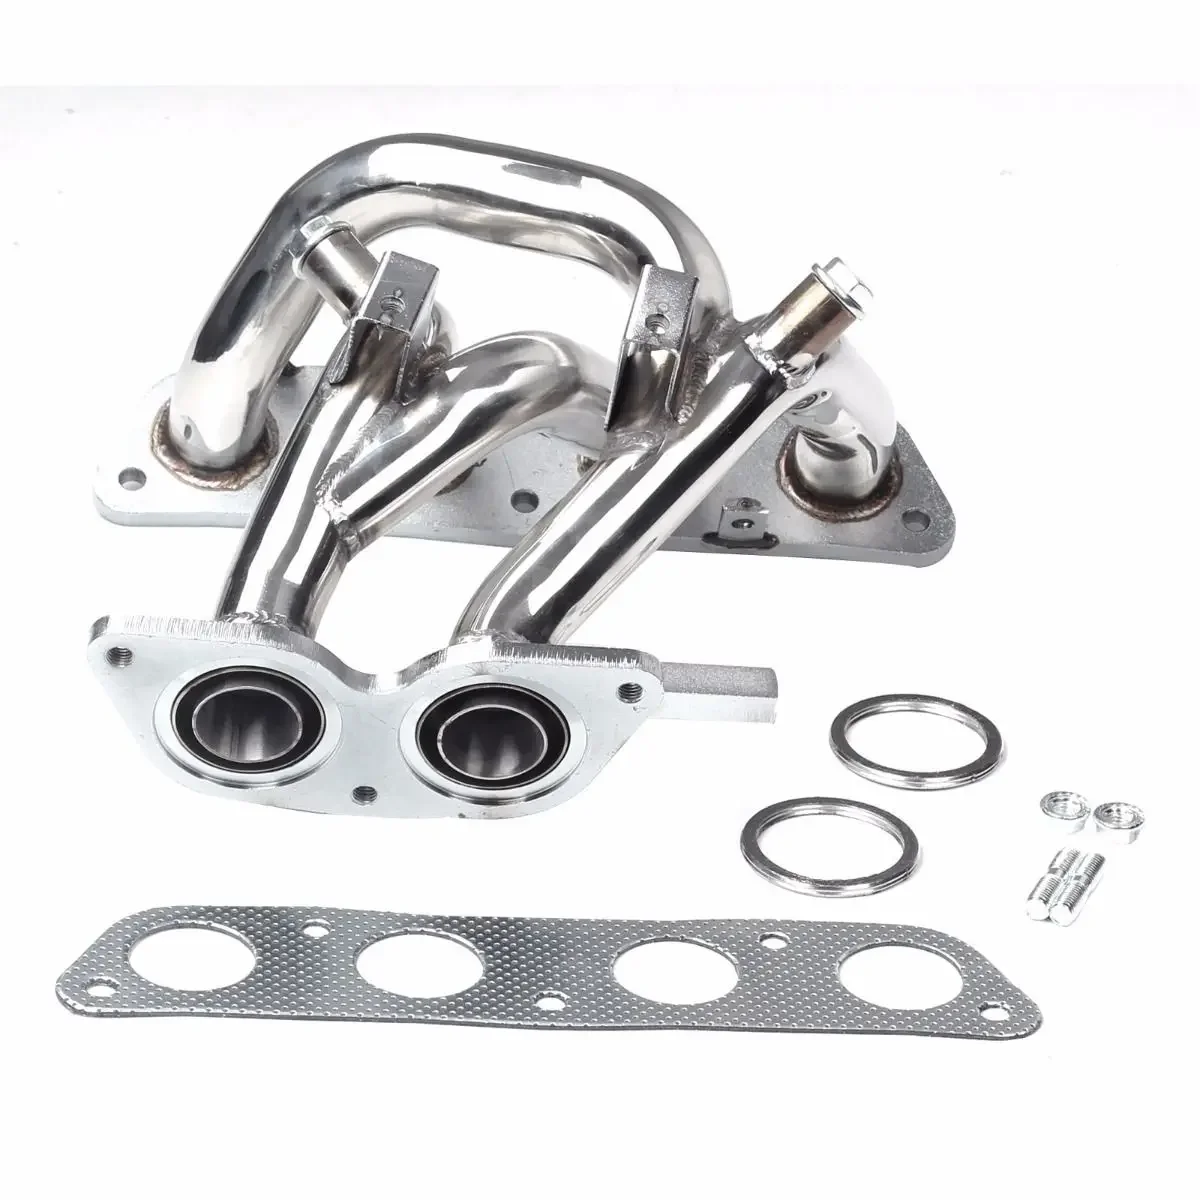 

Stainless Steel Long Tube Racing Exhaust Manifold Exhaust Systems For 99-07 Tovota MRSMR2 Spyder 1.8L DOHC 4 Cylinder Engines